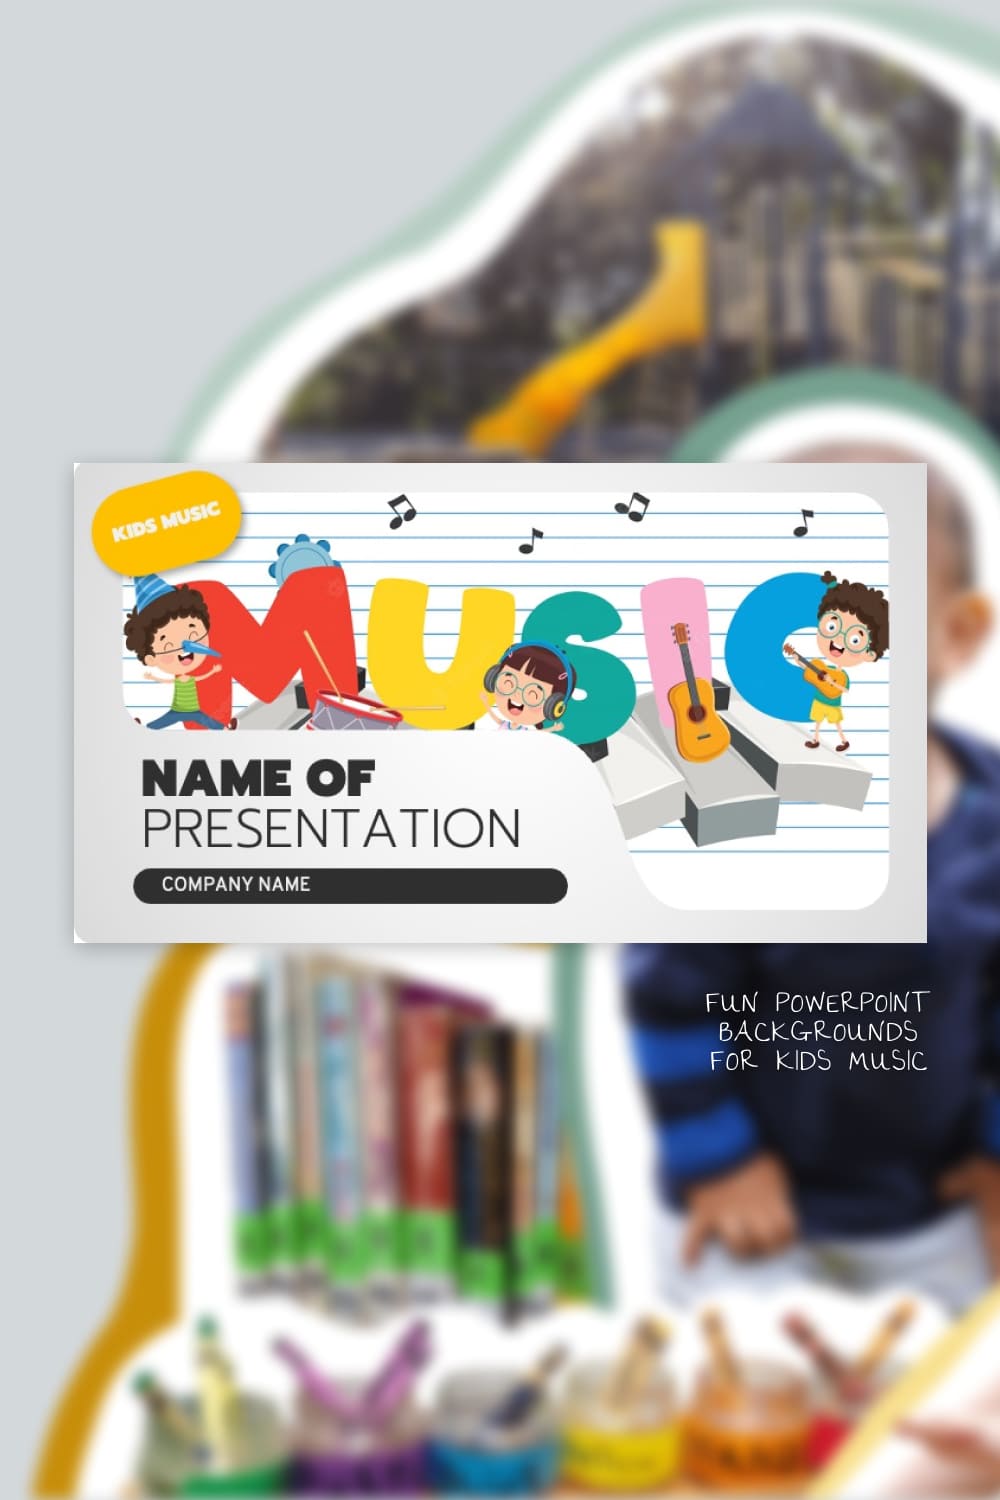 Fun Powerpoint Backgrounds For Kids Music Pinterest.